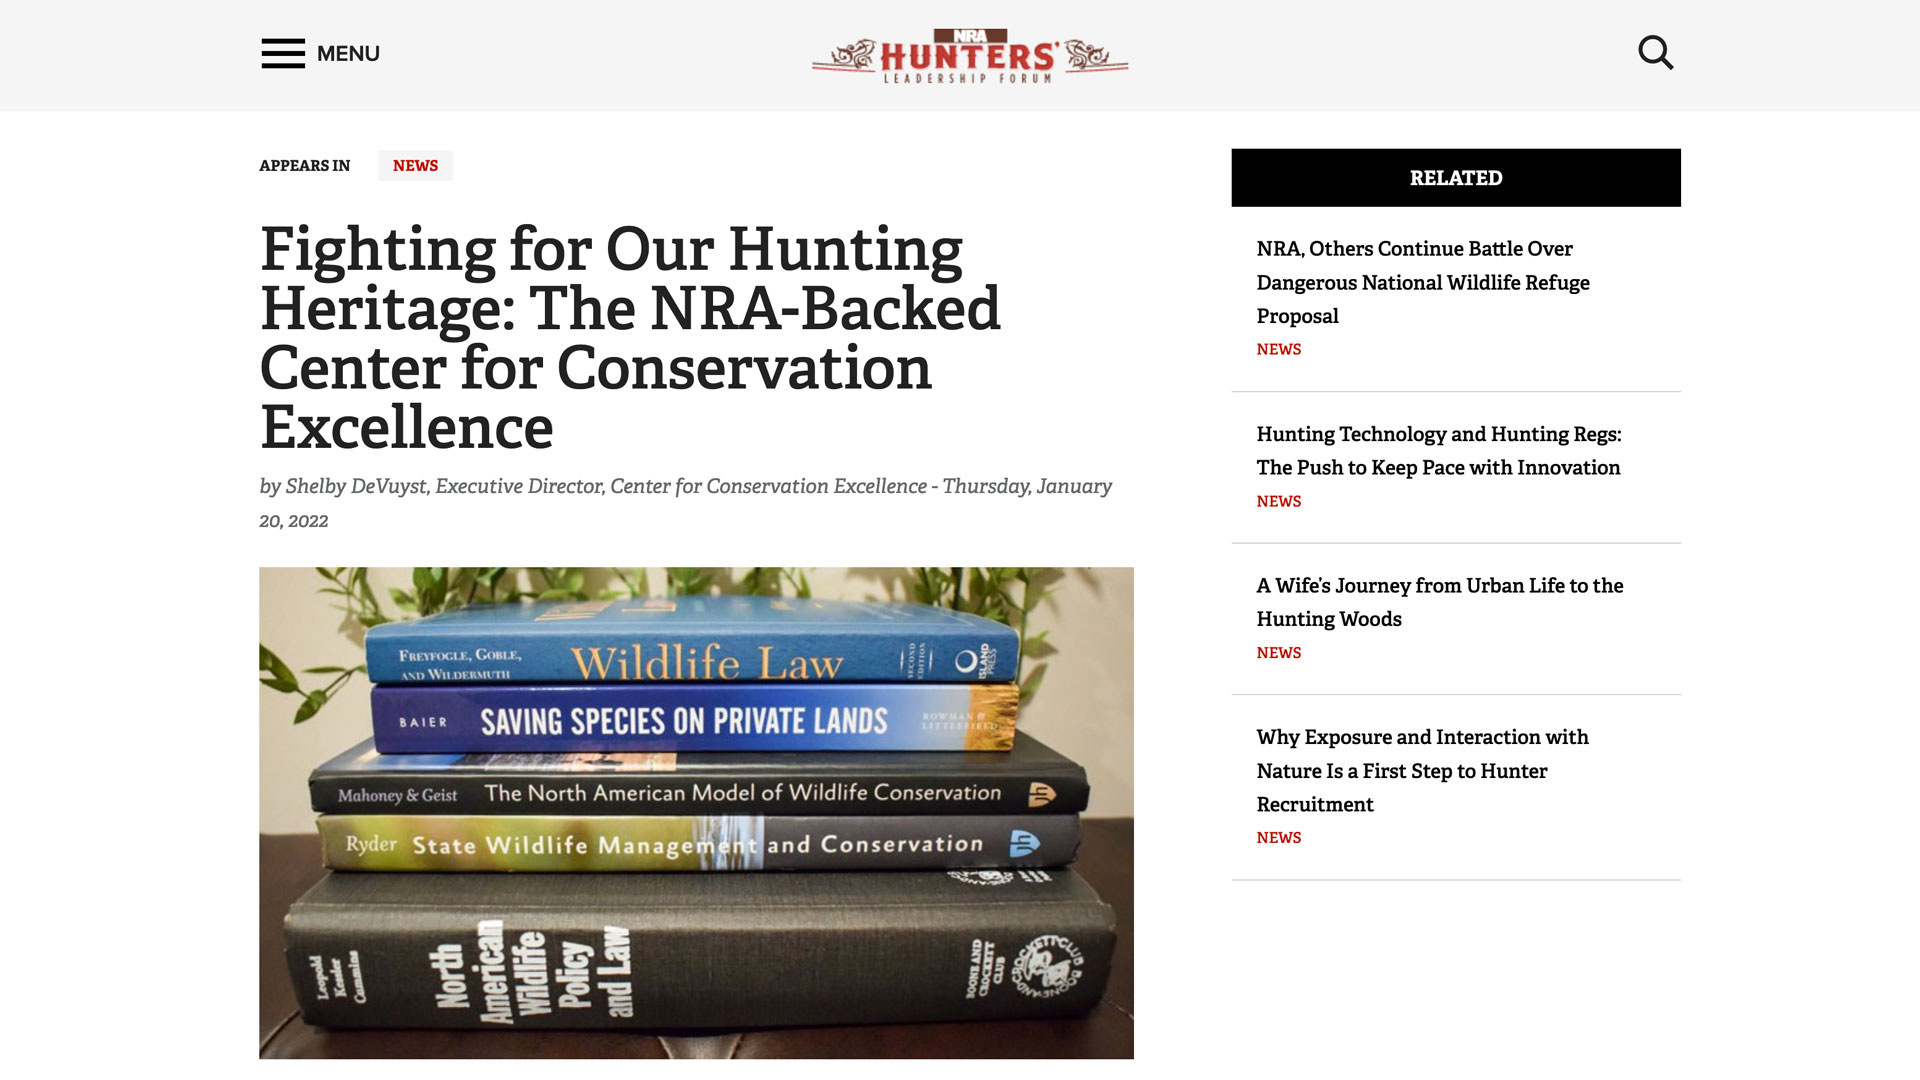 NRA Hunters' Leadership Forum web article "Fighting for Our Hunting Heritage: The NRA-Backed Center for Conservation Excellence" screenshot.